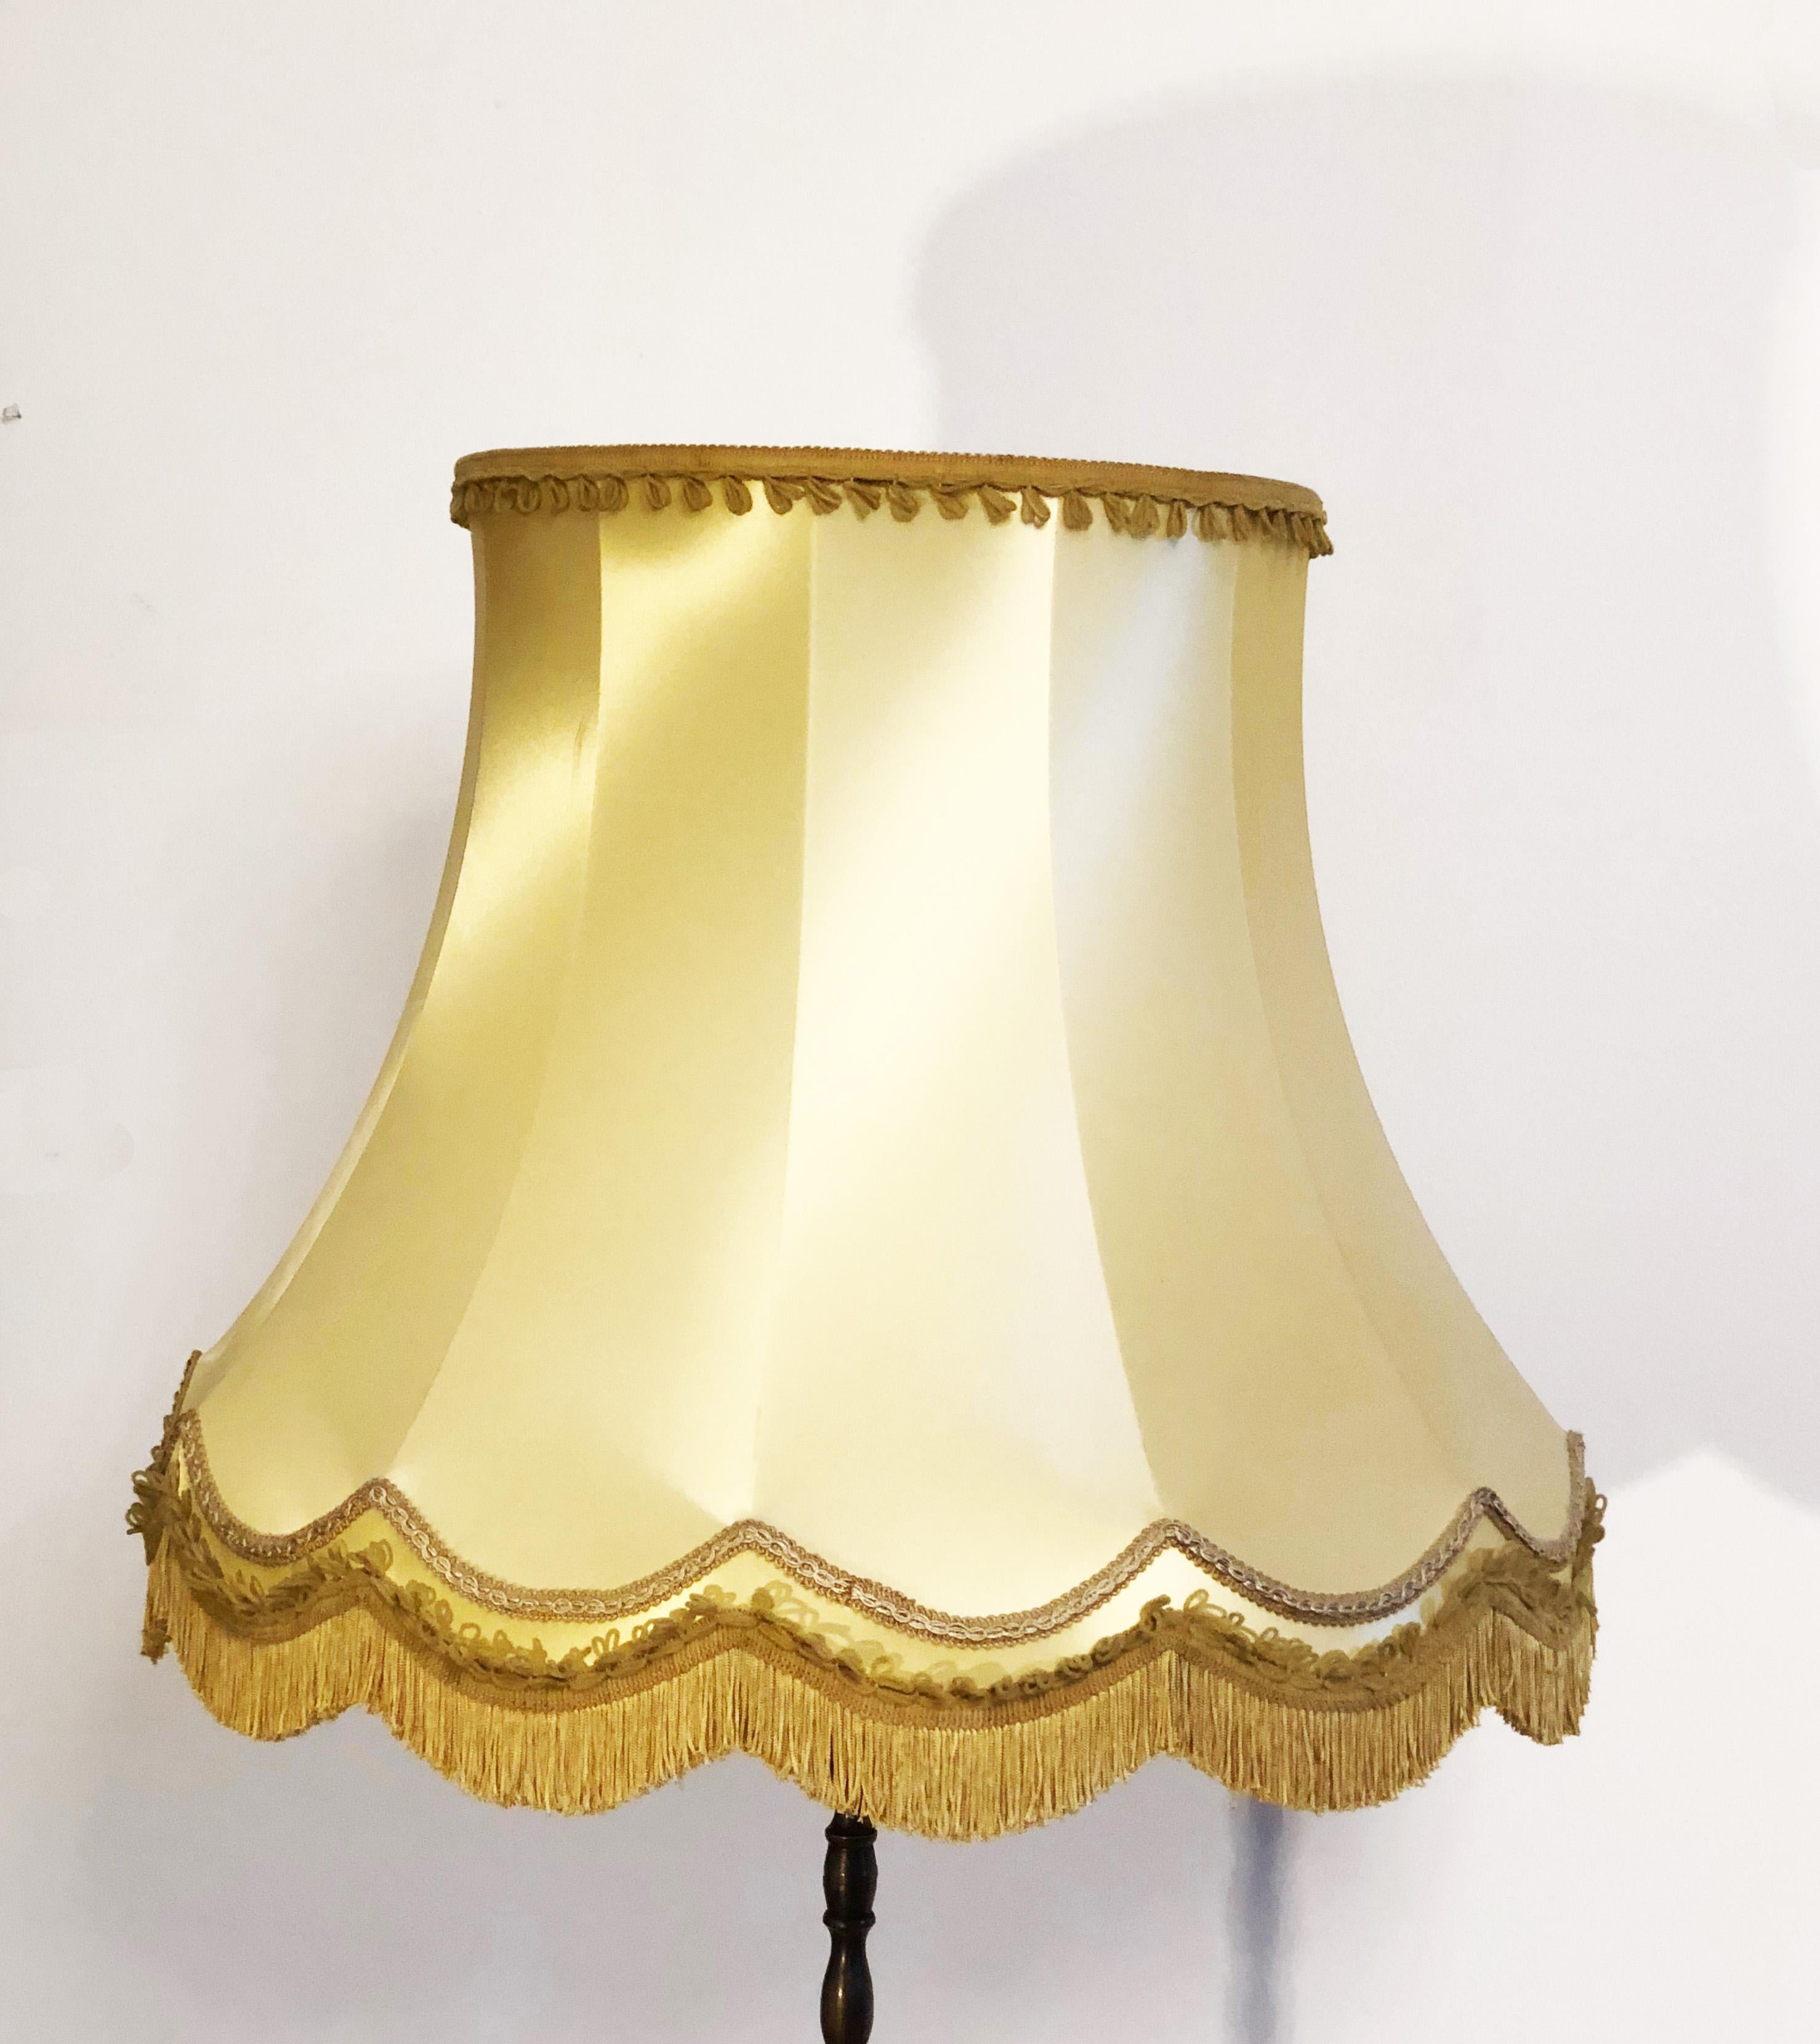 Brass lamp food with fitted with two E26/E27 sockets up to 60 watts each, large silk shade. Made in France in the 1930s.